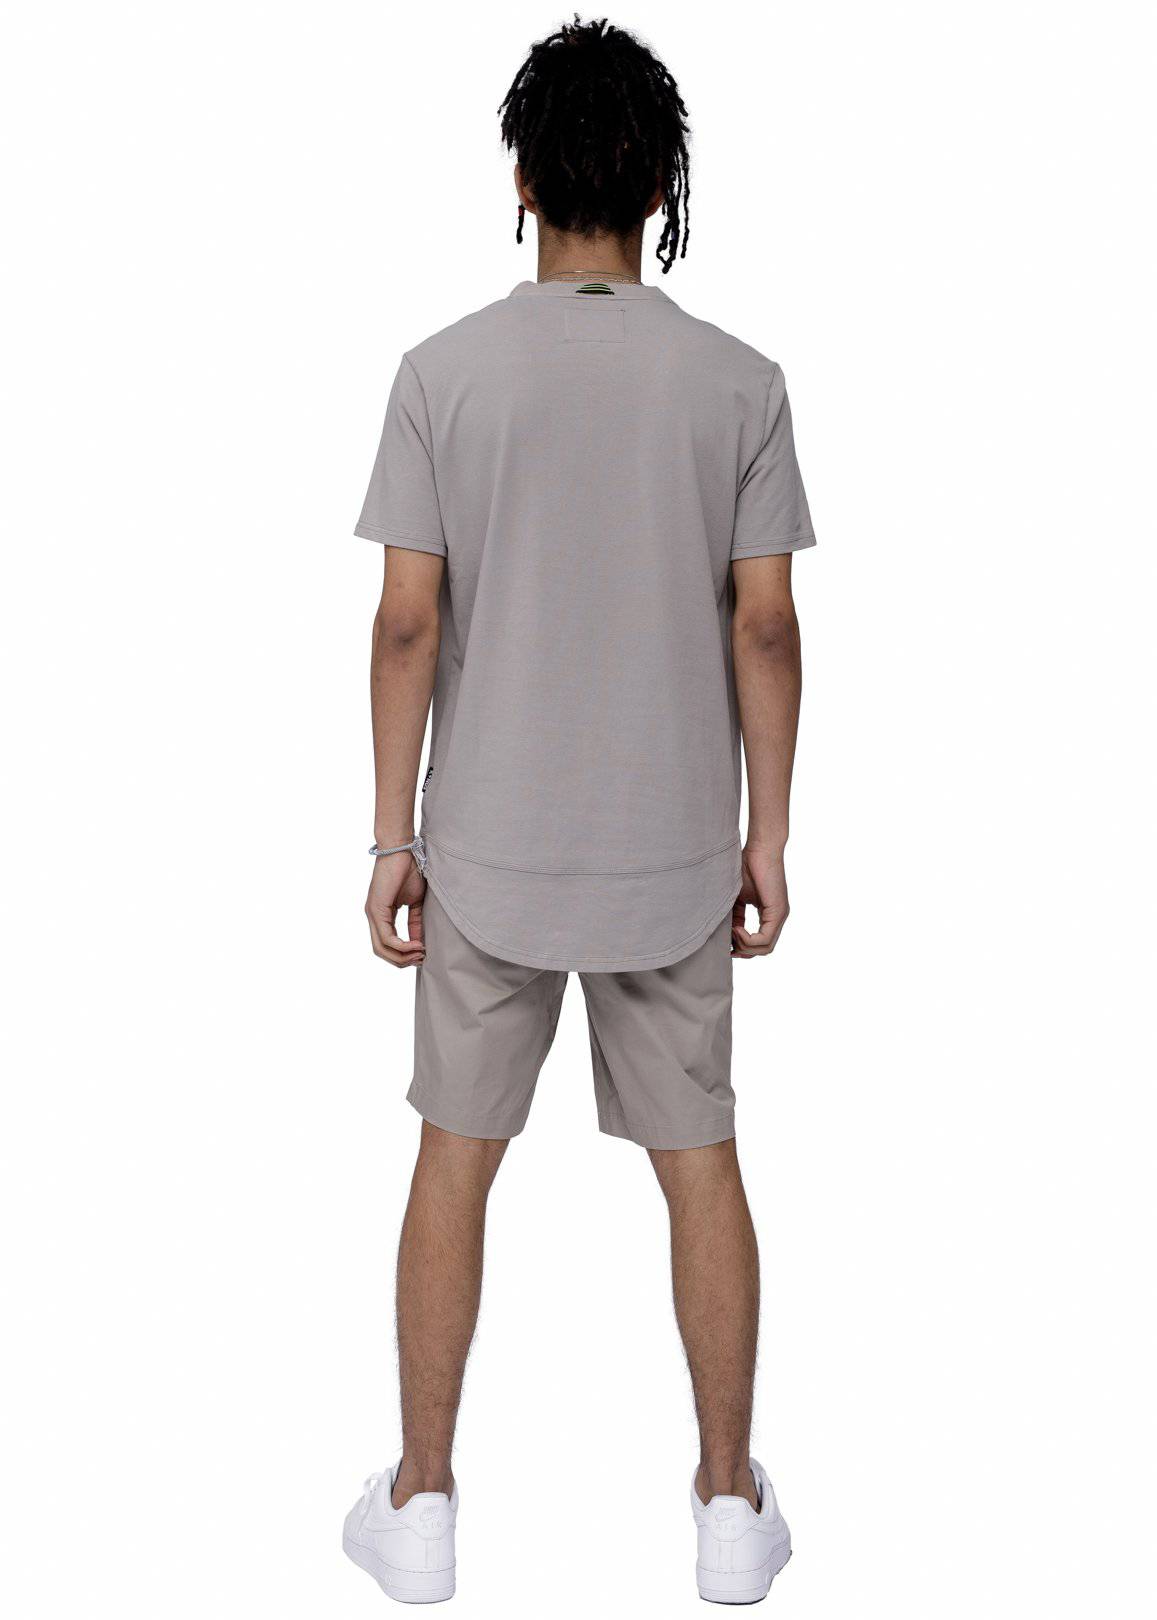 Men's T-Shirt with Curved hem In Taupe by Shop at Konus